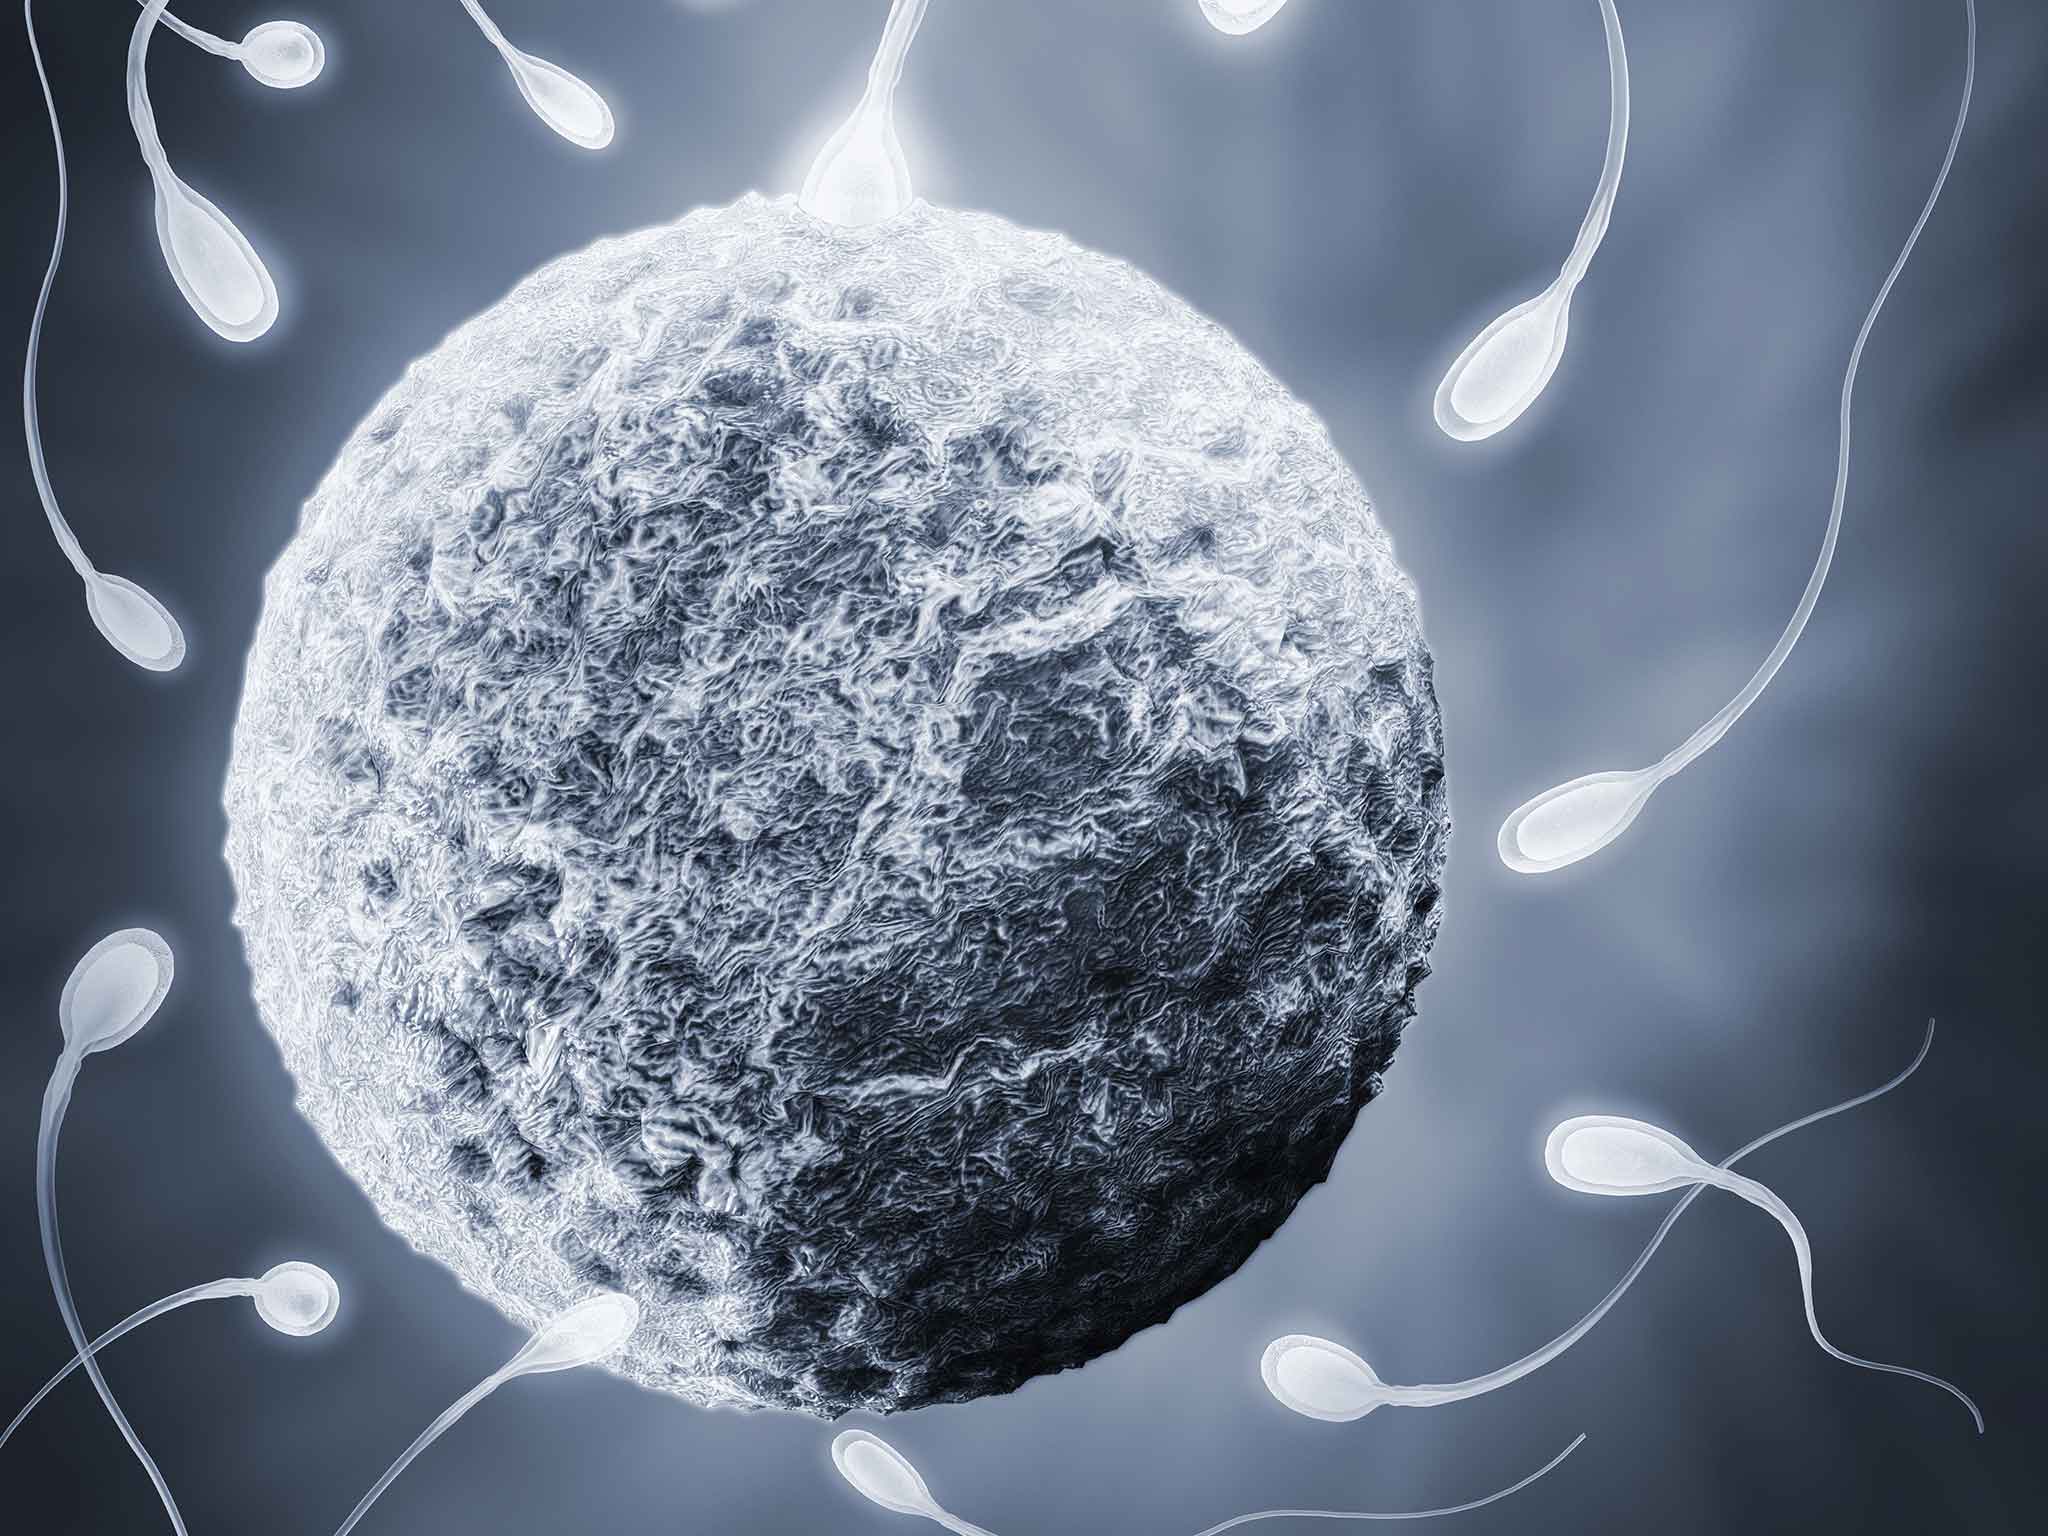 Mission accomplished: an illustration of the moment when a sperm cell gains entry to an egg